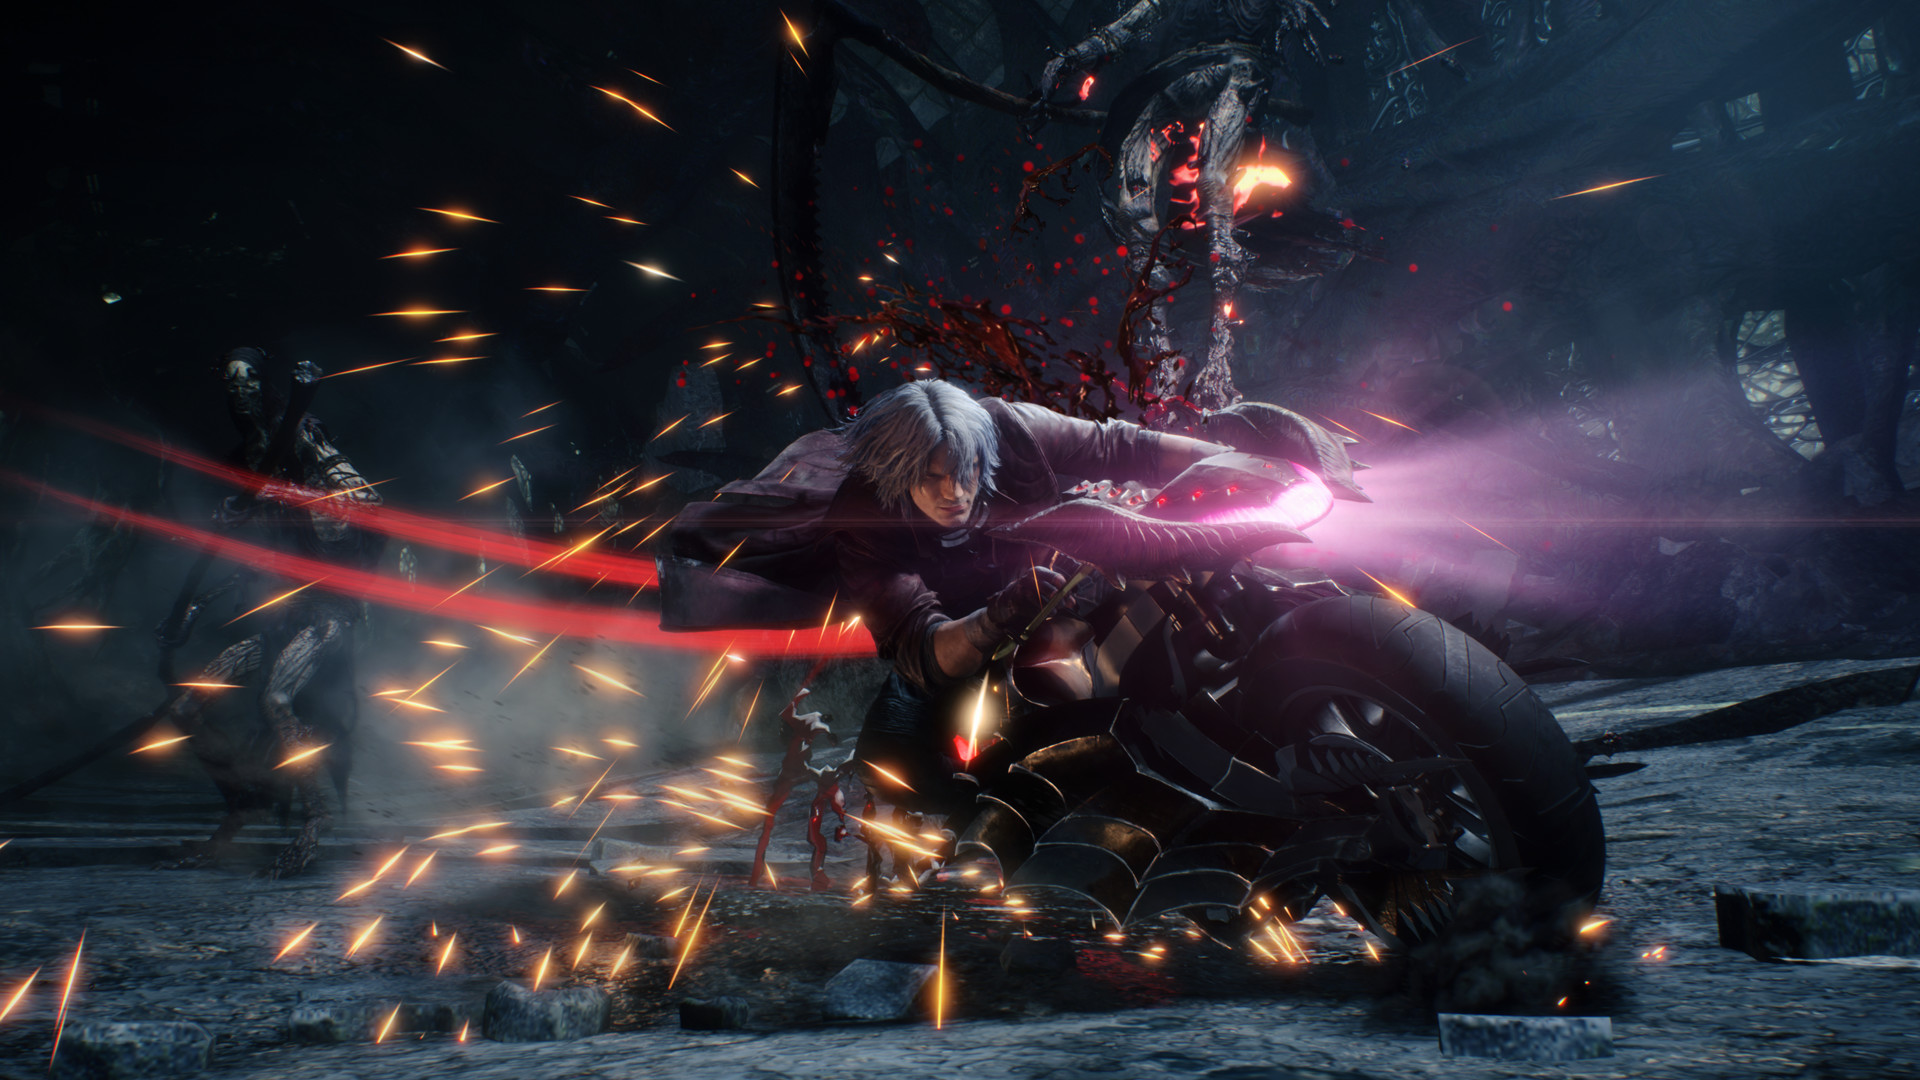 Devil May Cry 5 Timeline Places the Game After Devil May Cry 2